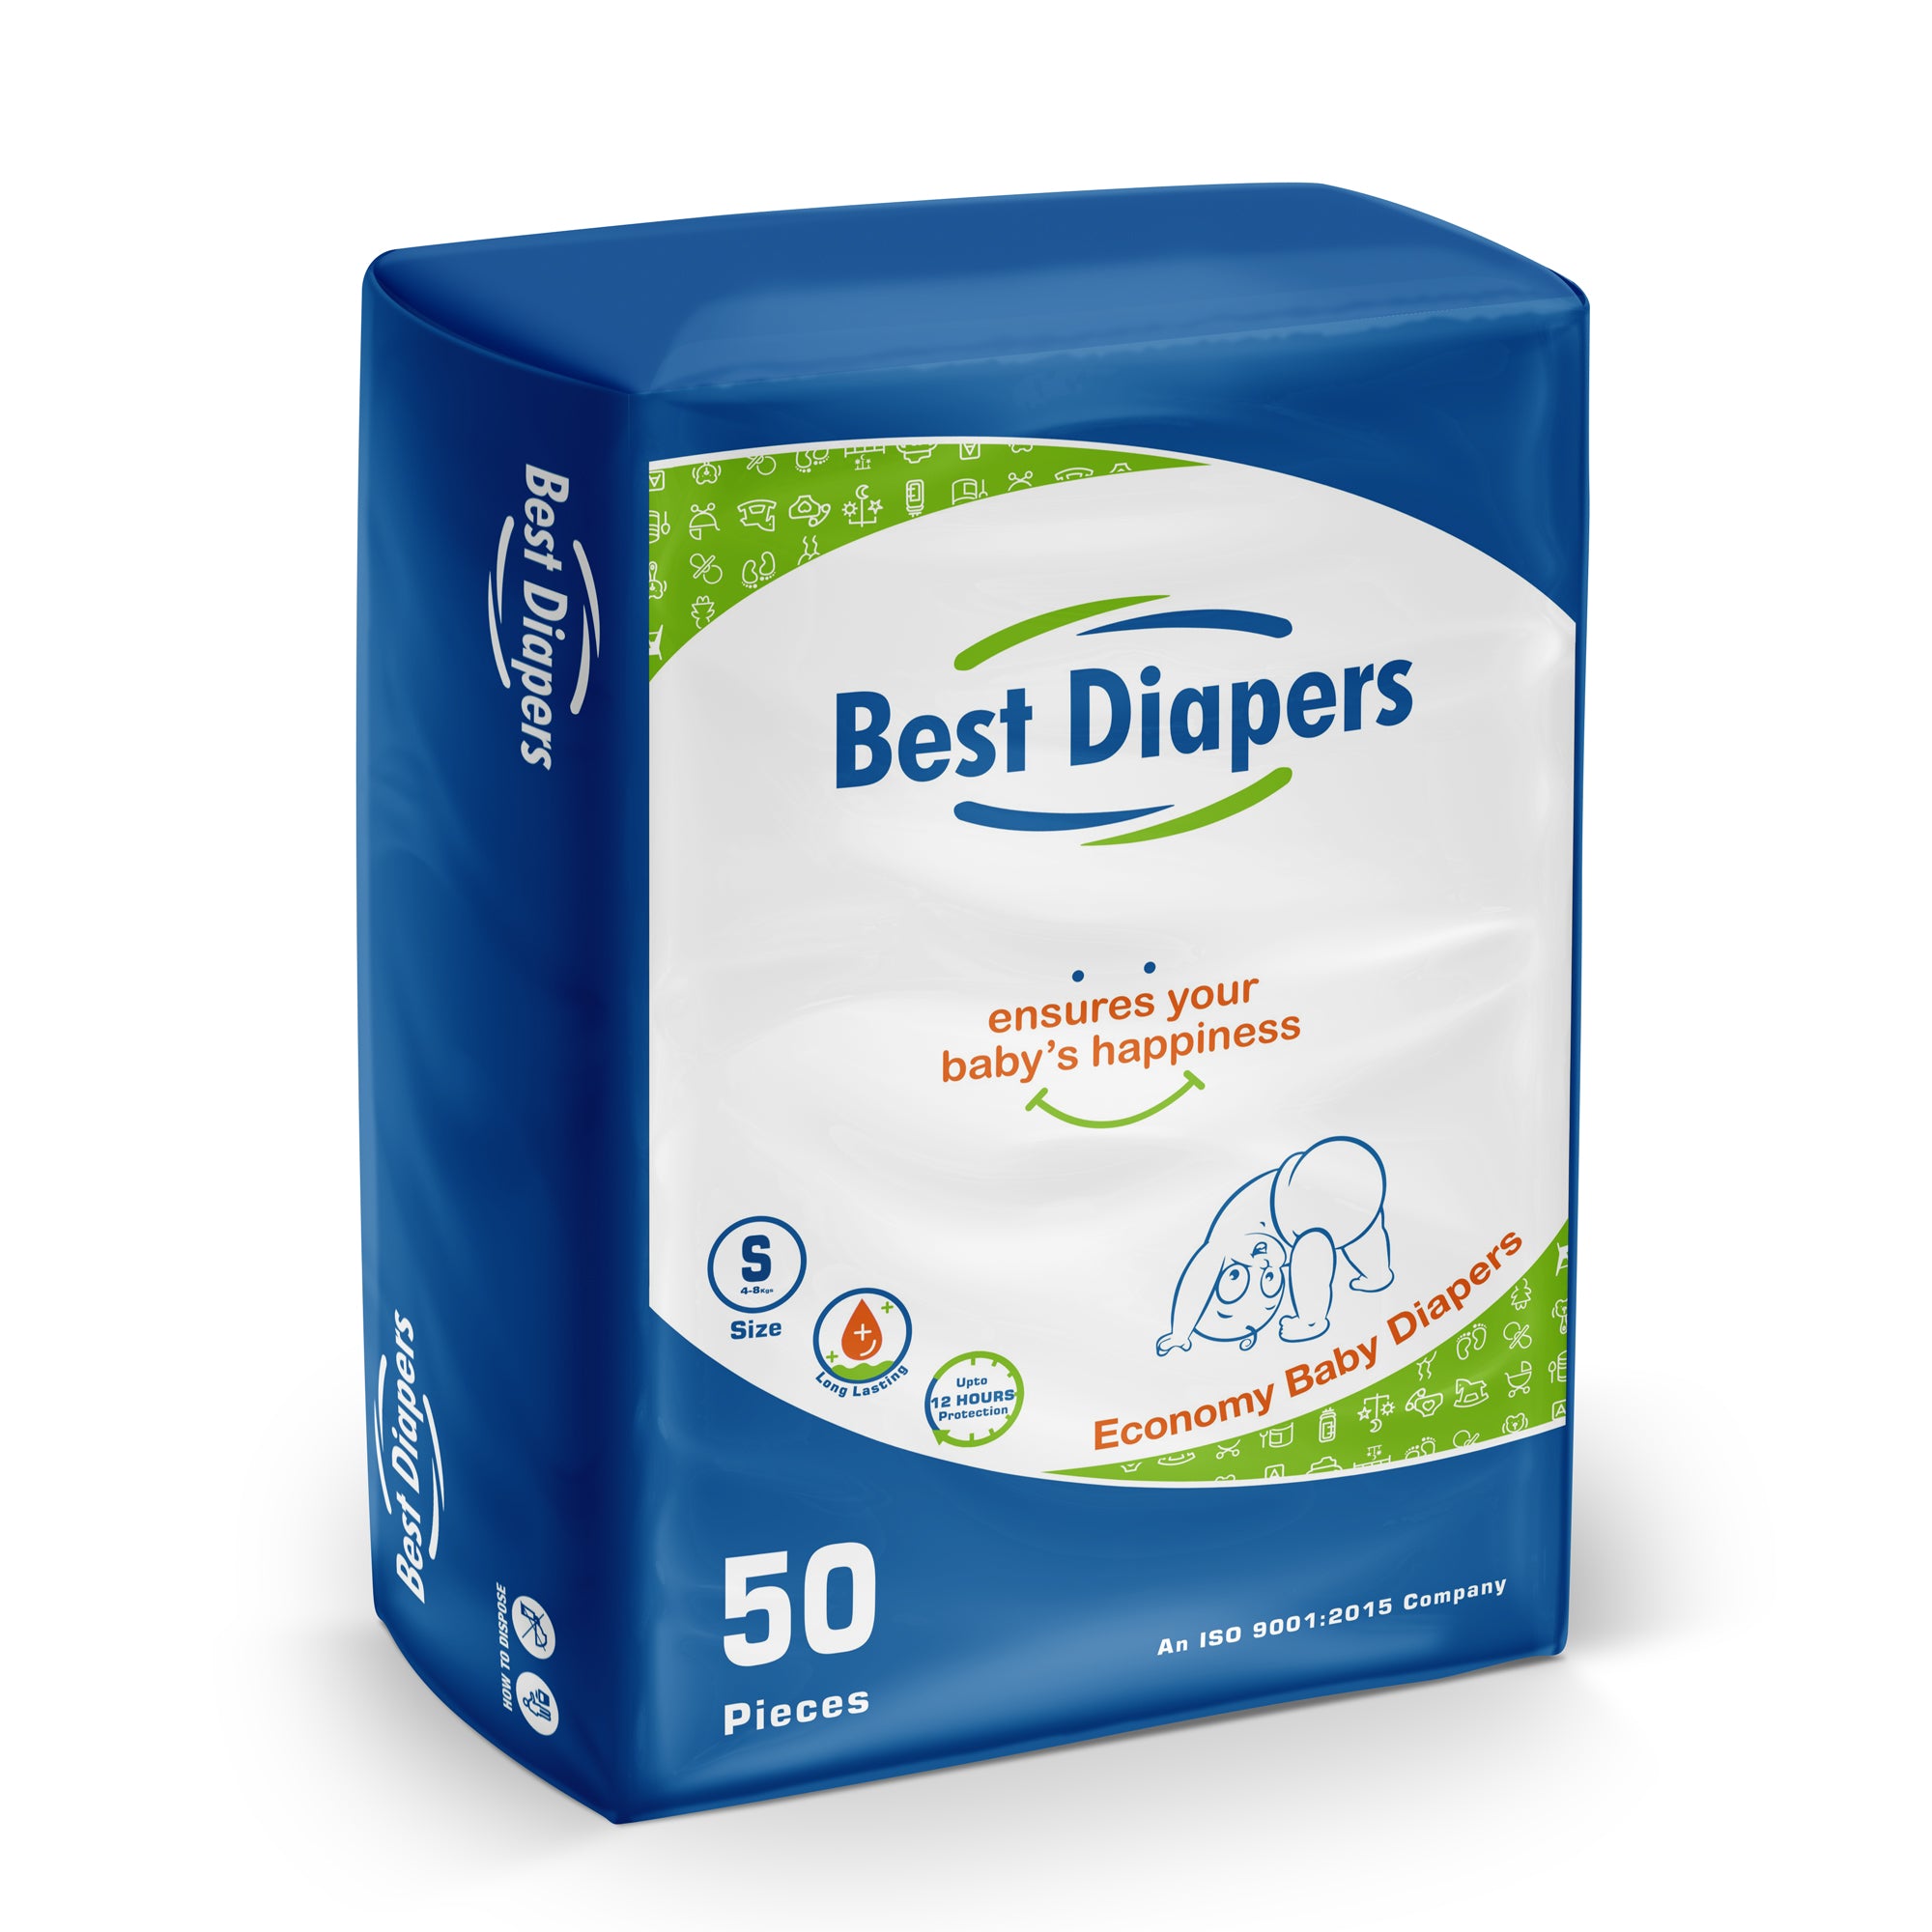 Baby Diaper Best Diapers - Small - 50 Pcs (Tape Type)